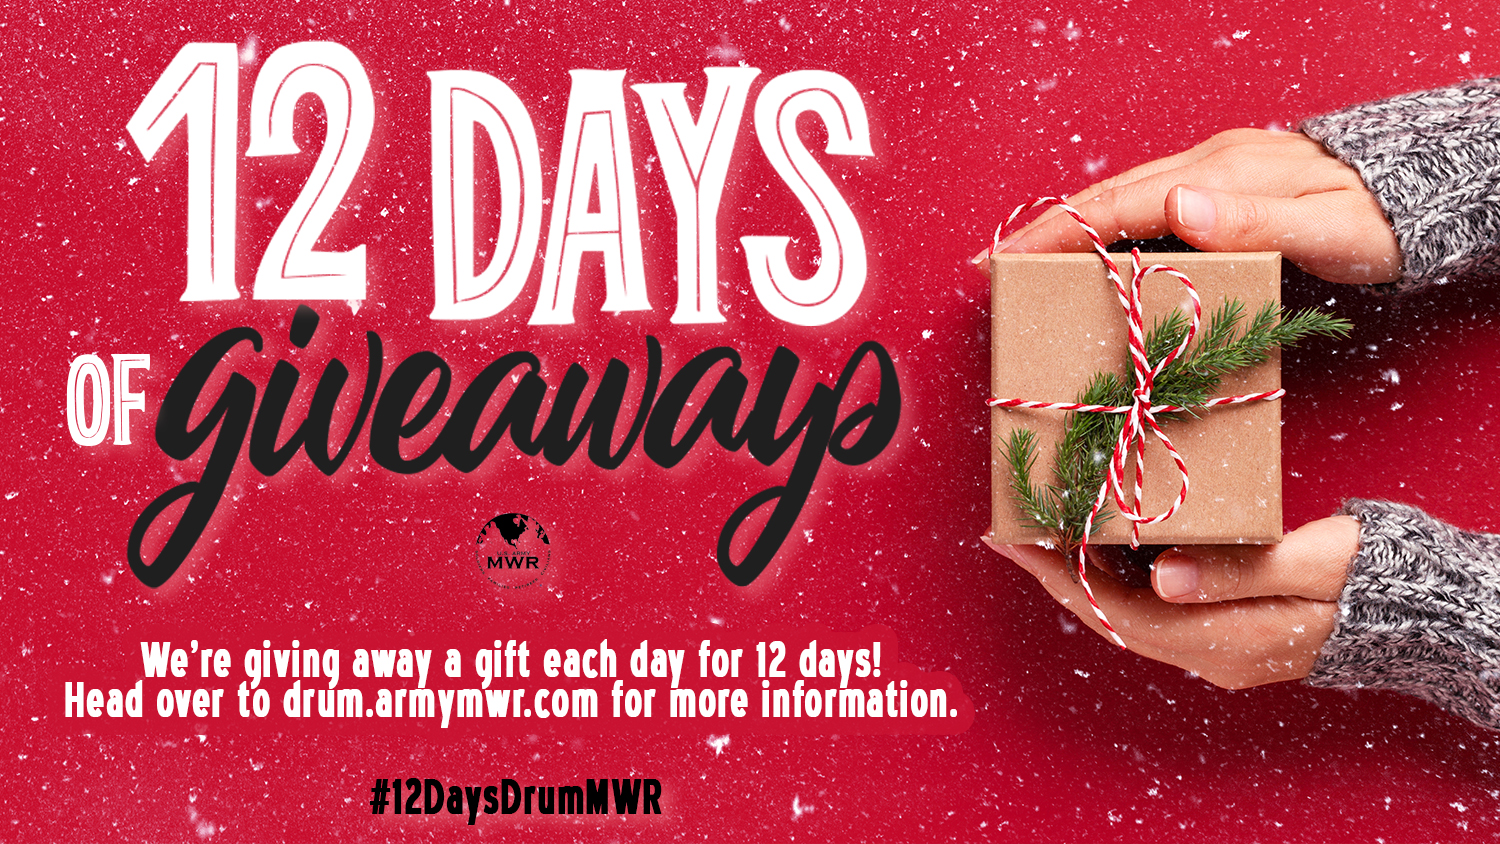 View Event 12 Days of Giveaways Ft. Drum US Army MWR